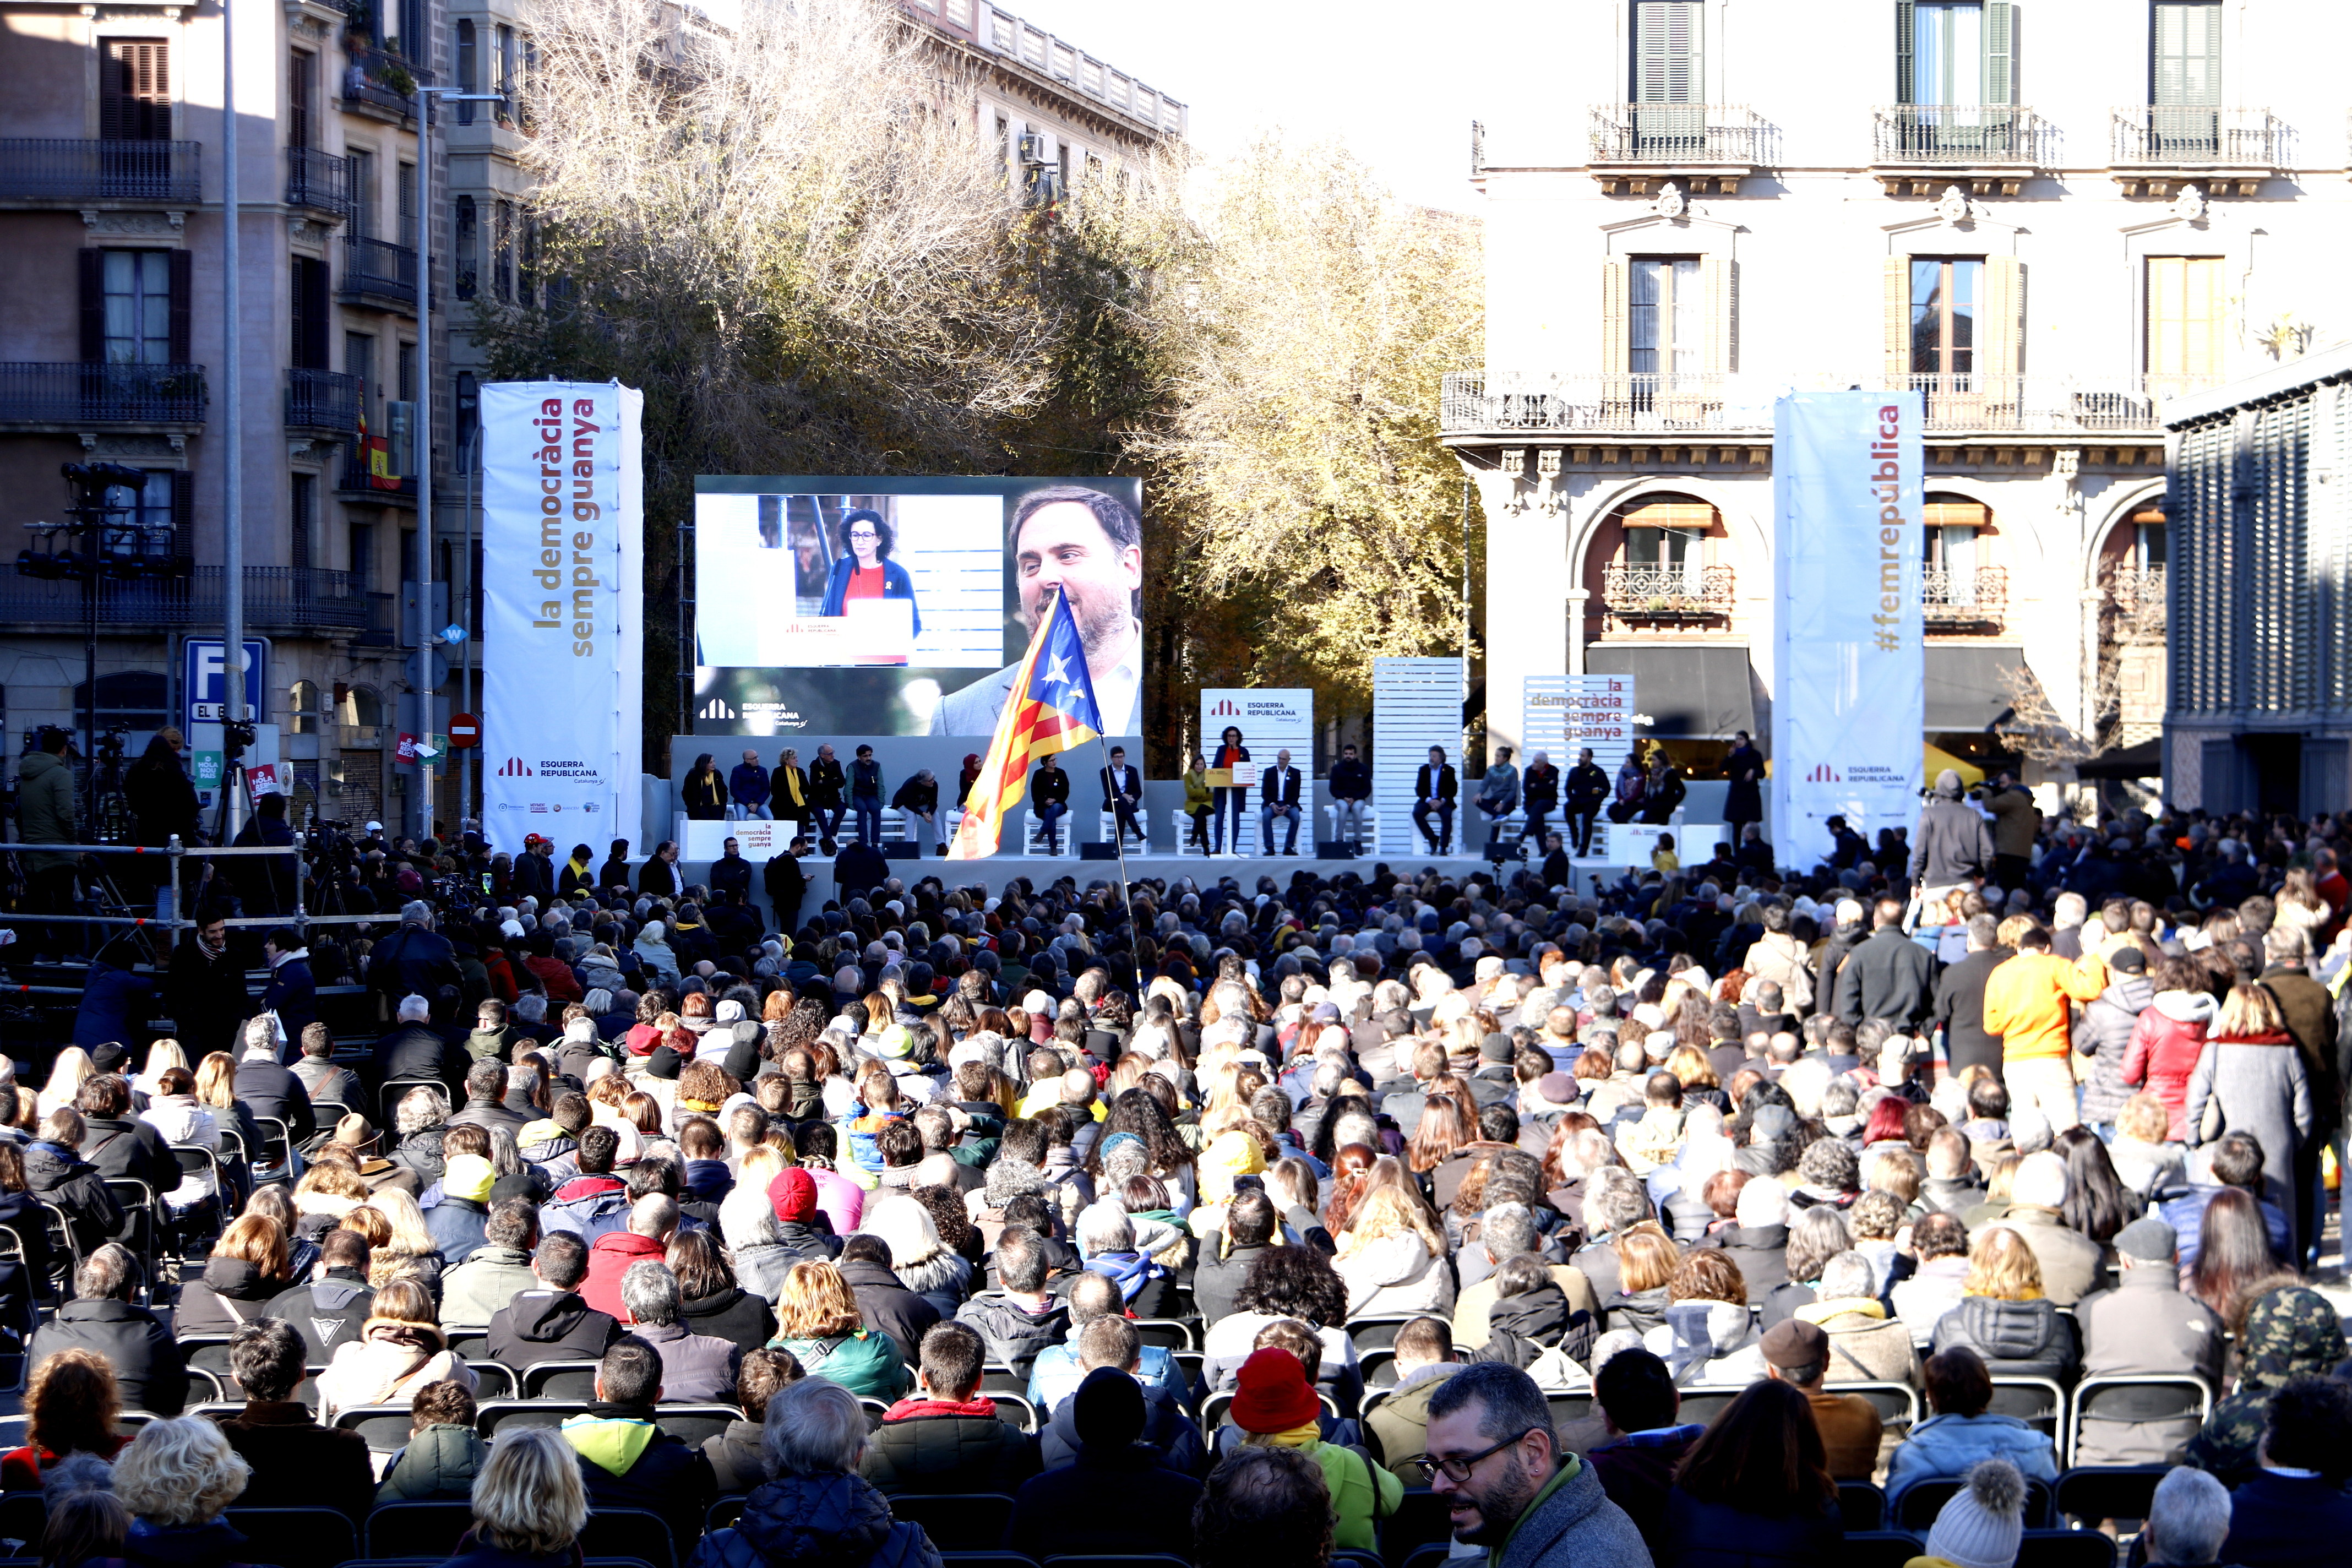 The ERC campaign event in heart of Barcelona, where imprisoned leader made surprise audio appearance (by ACN)